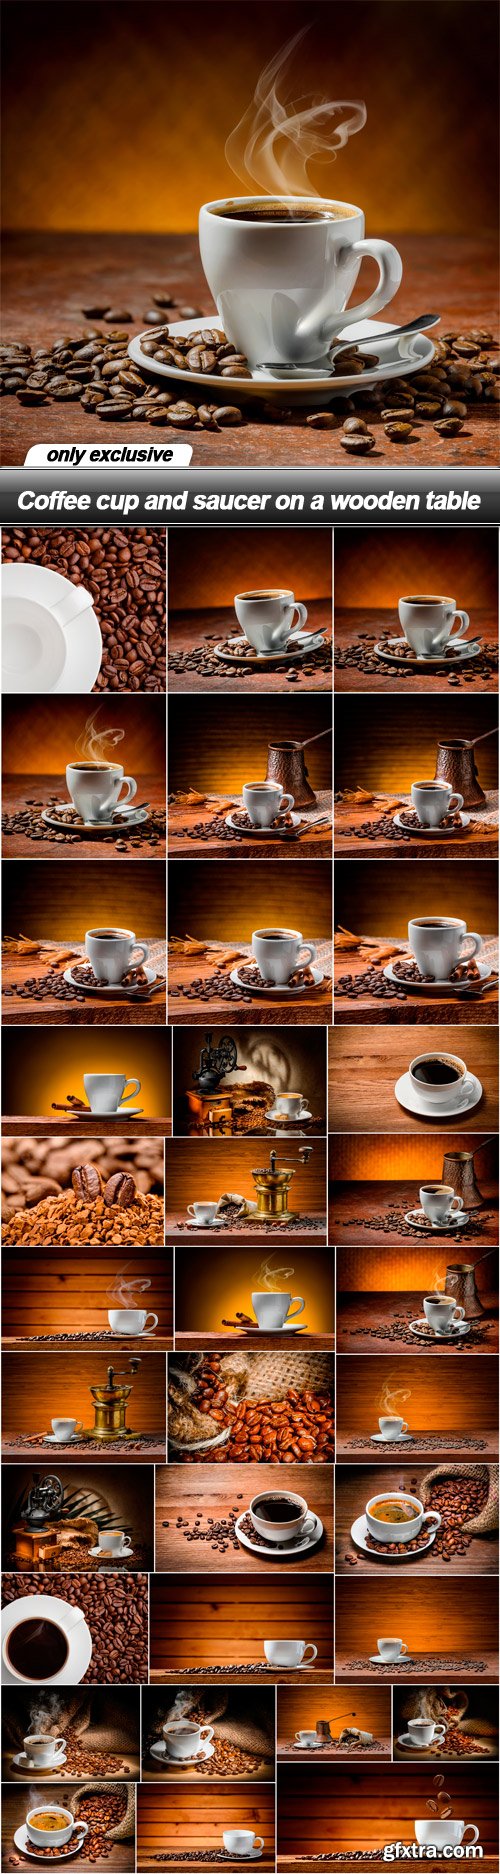 Coffee cup and saucer on a wooden table - 34 UHQ JPEG